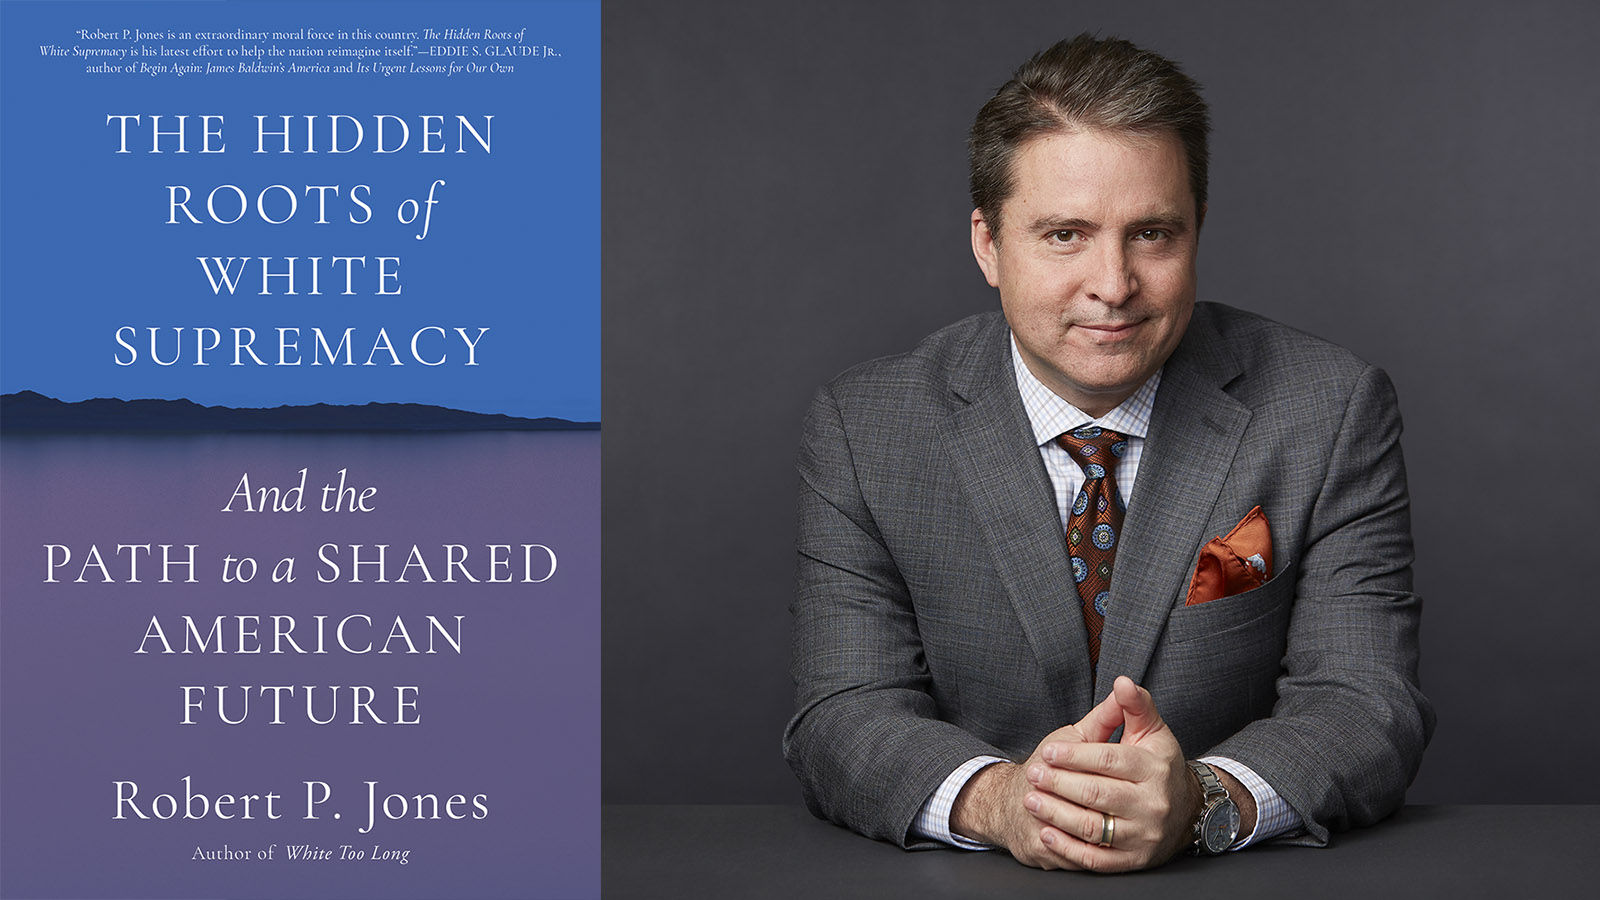 "The Hidden Roots of White Supremacy And the Path to a Shared American Future" and author Robert P. Jones. Courtesy images